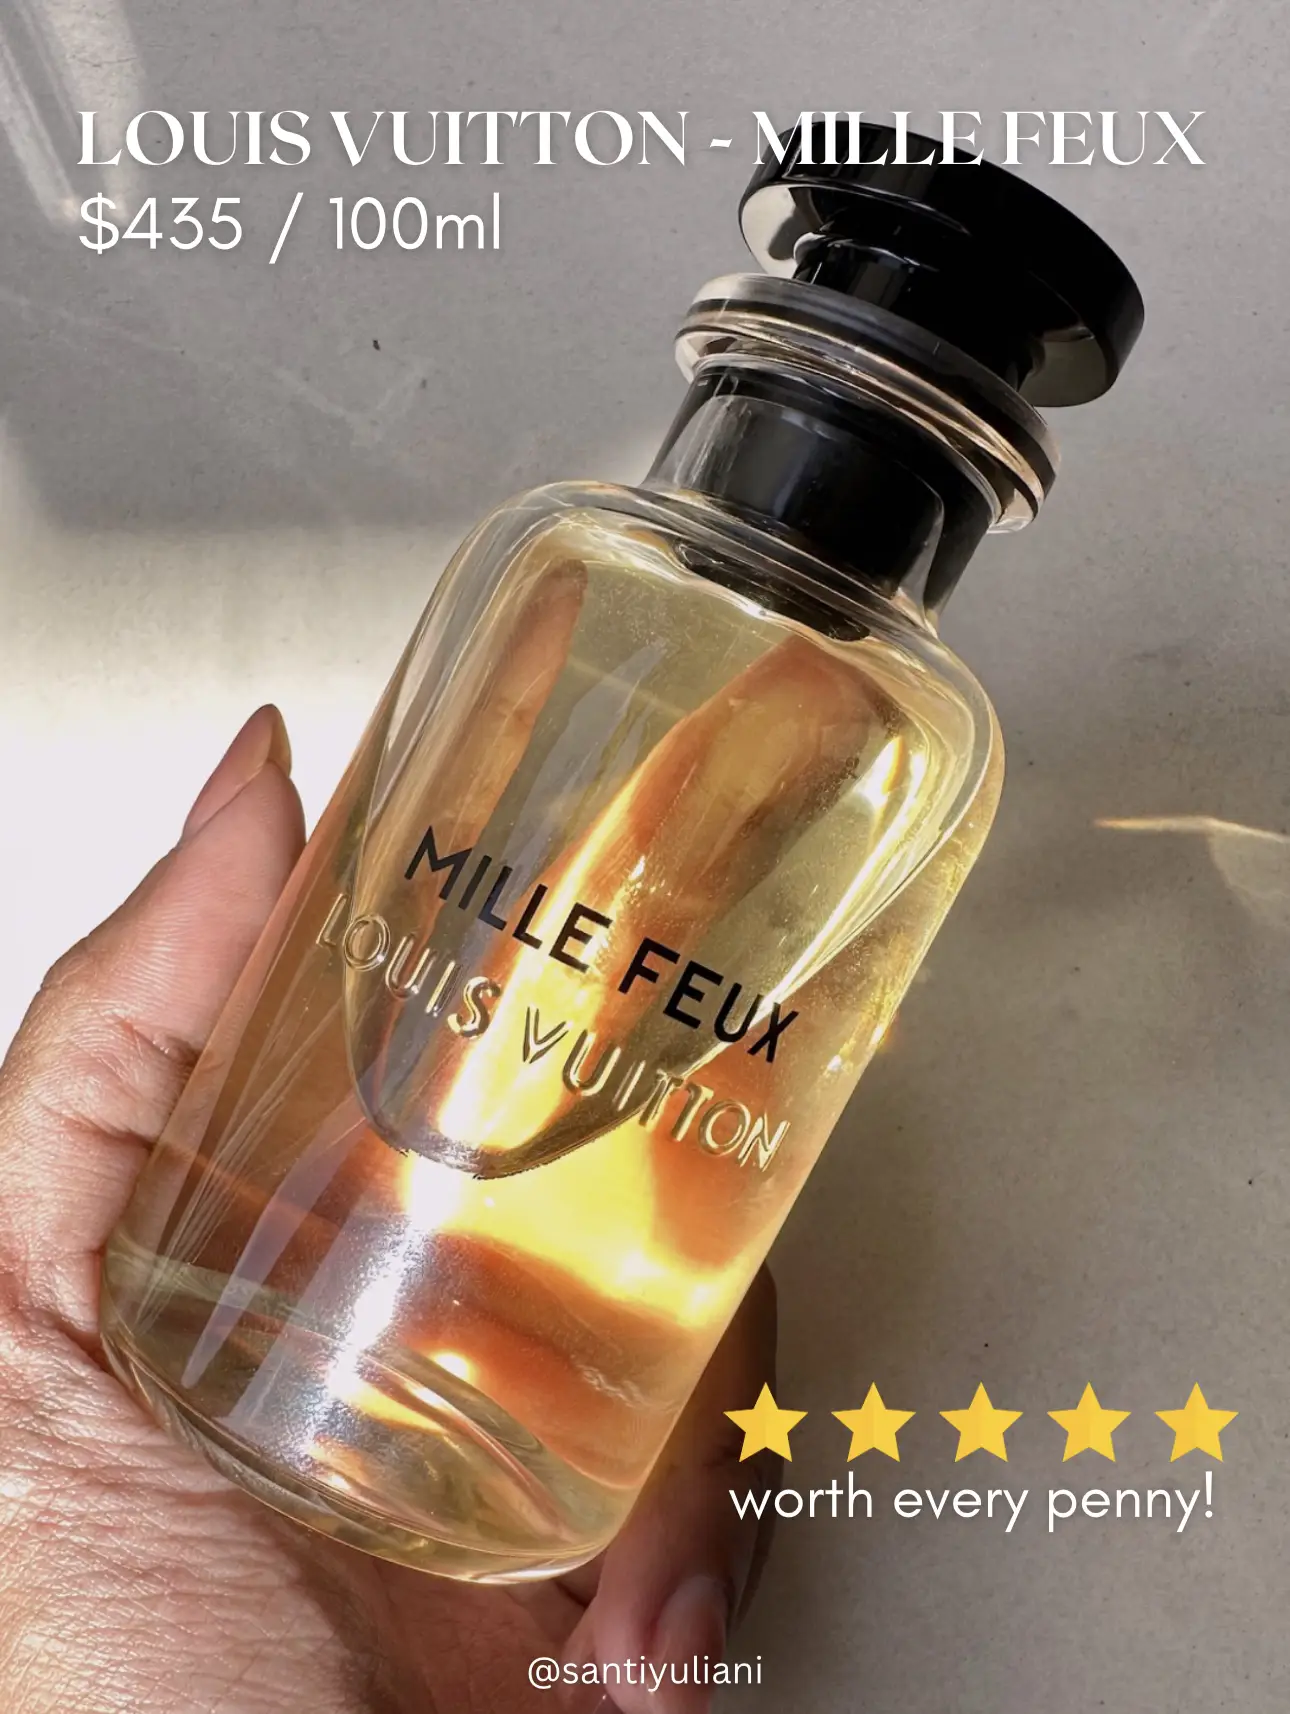 Mille Feux is the perfume! I've never smelled anything better